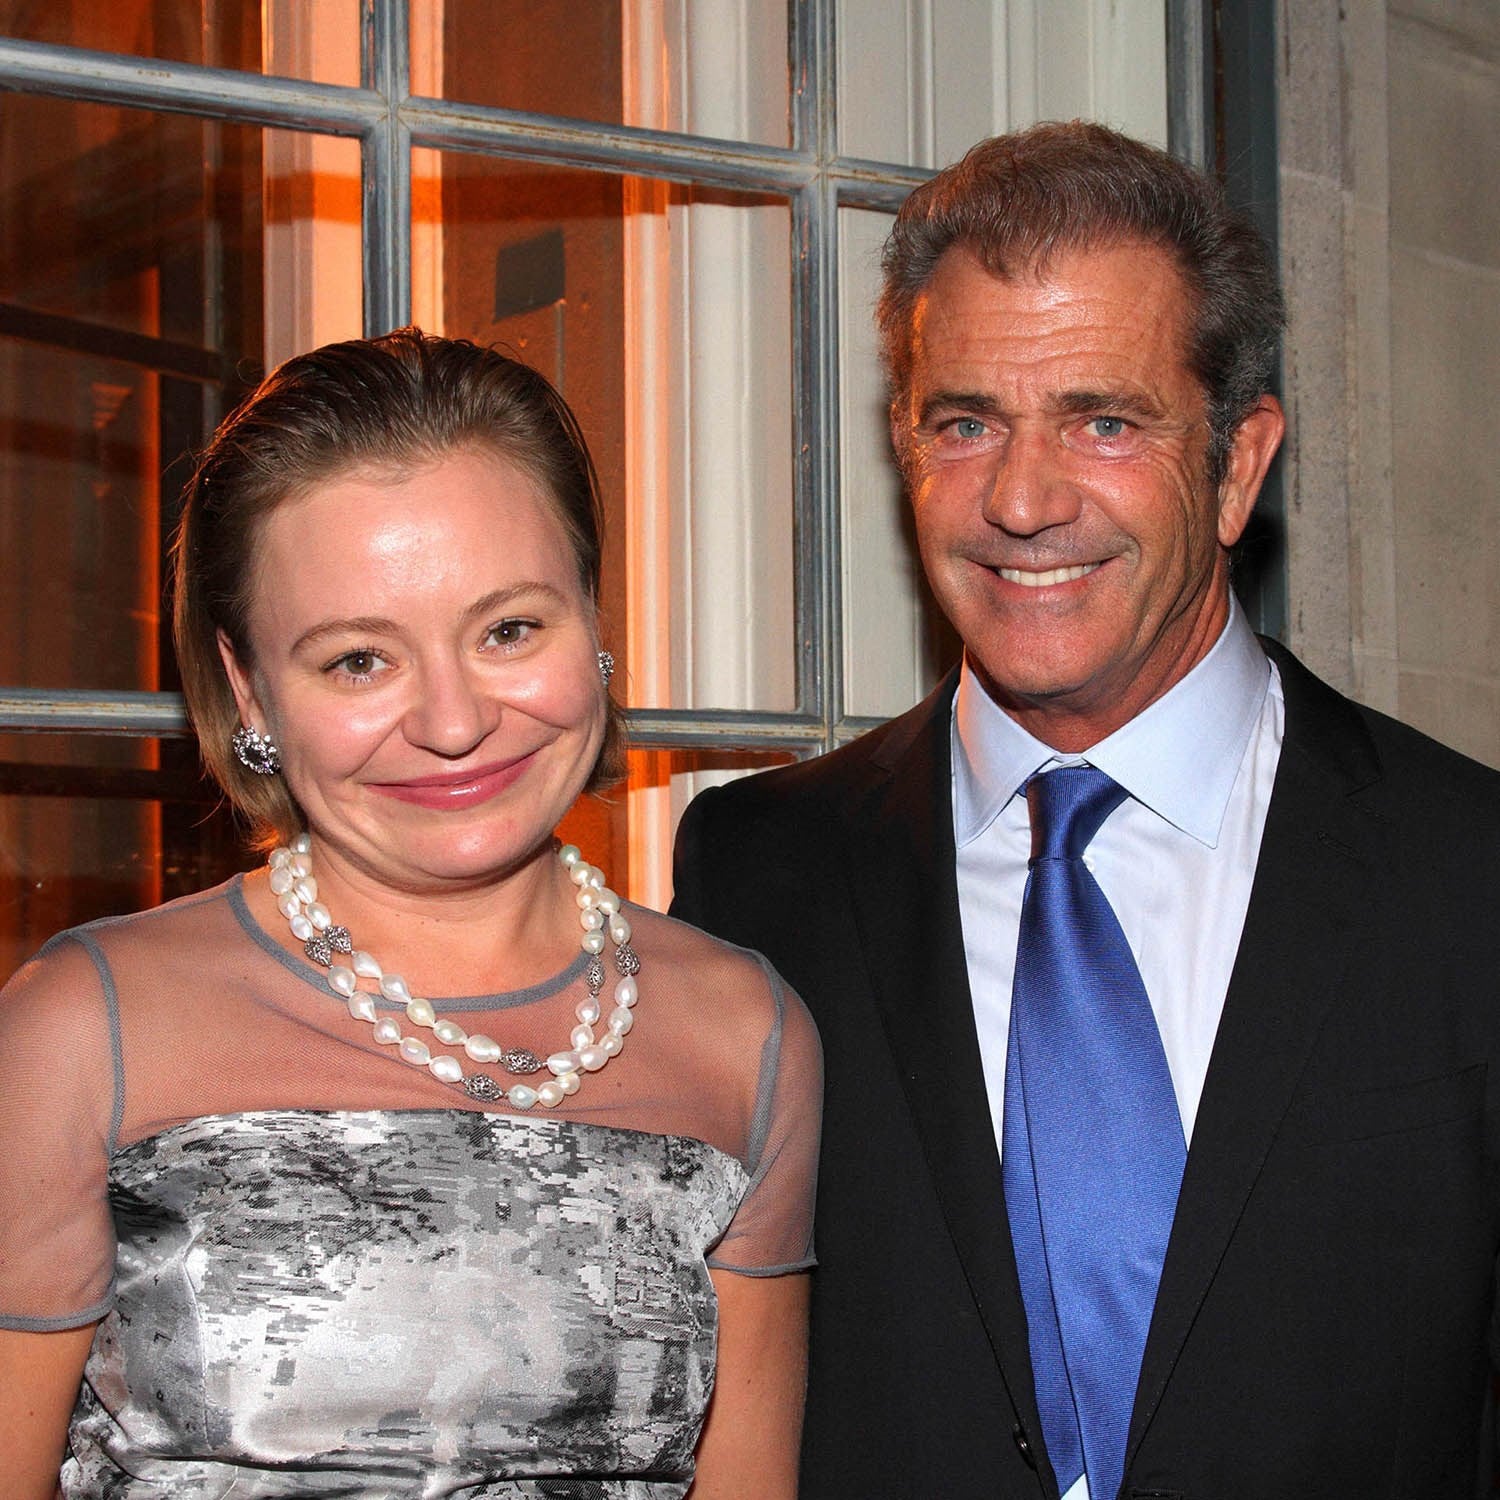 MEL GIBSON AND MARIA SOLIDER